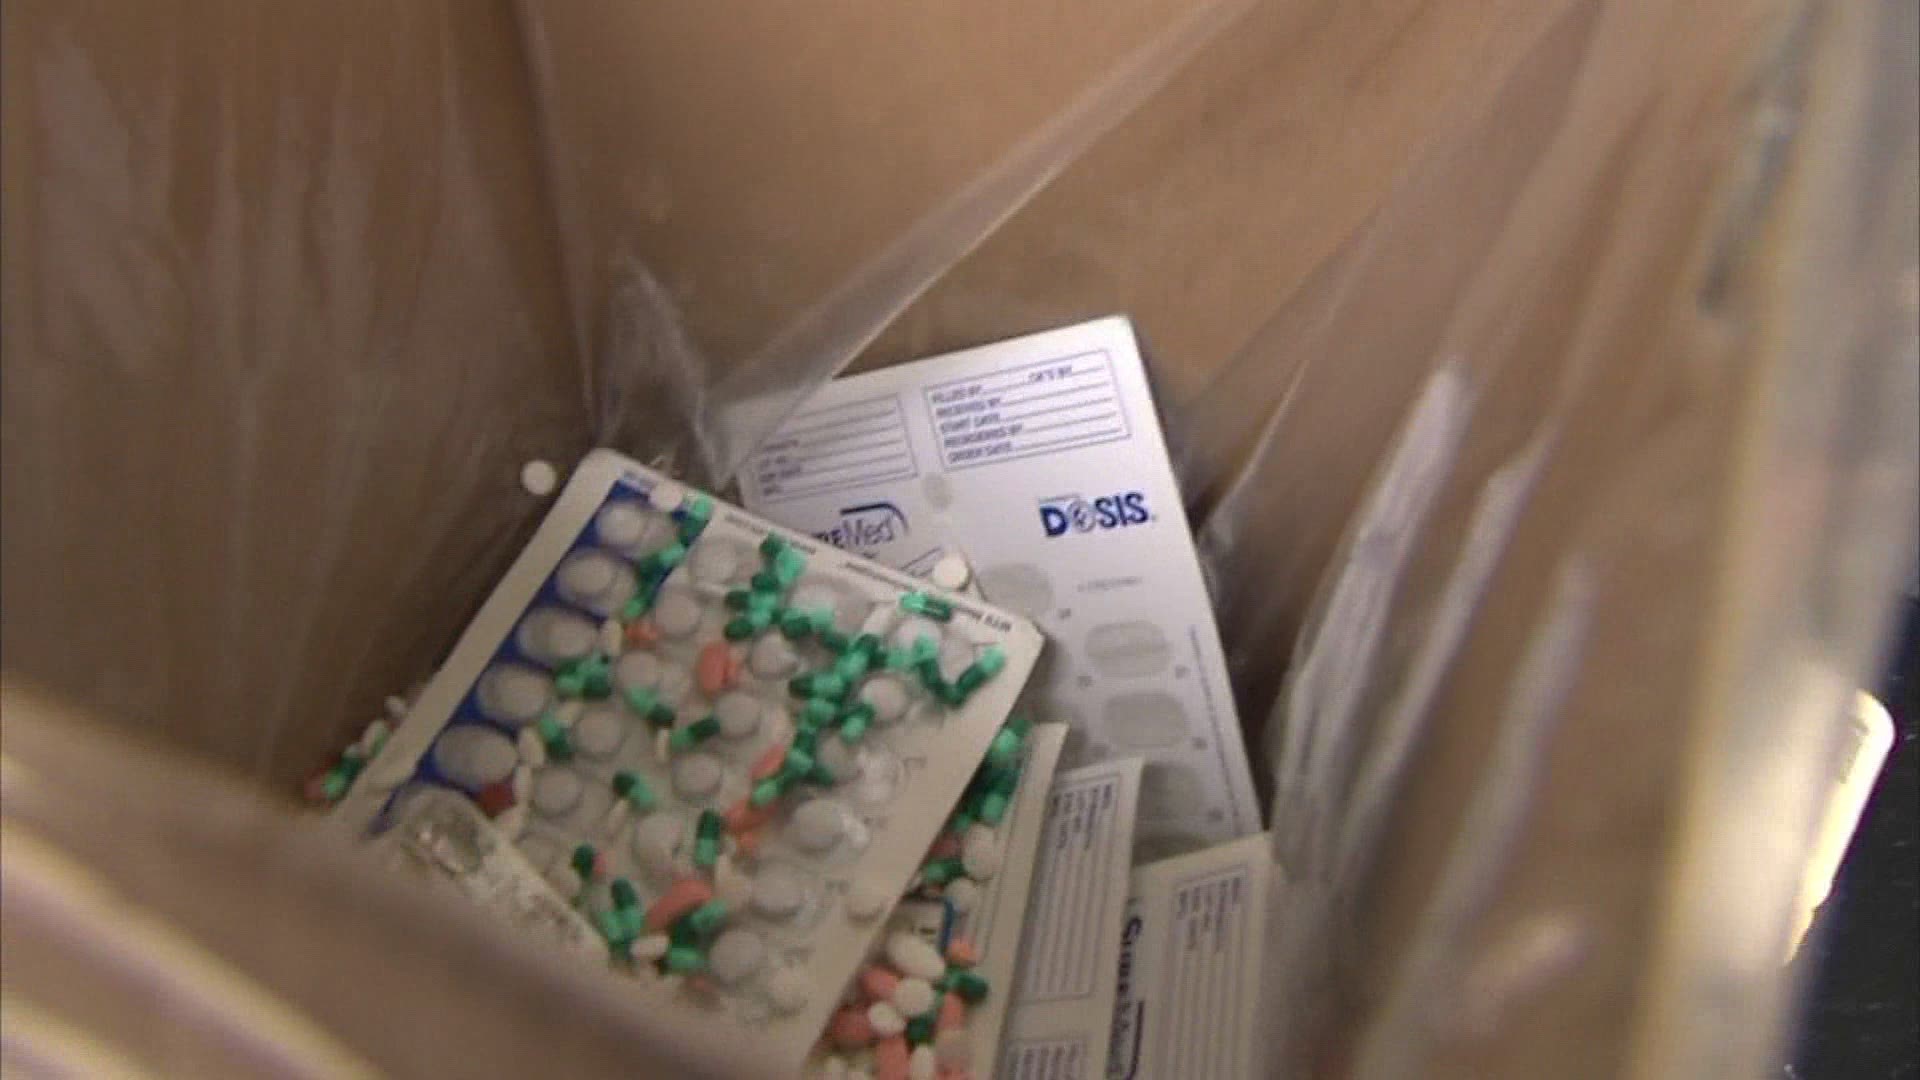 10TV talked with a DEA representative about National Drug Take Back Day.